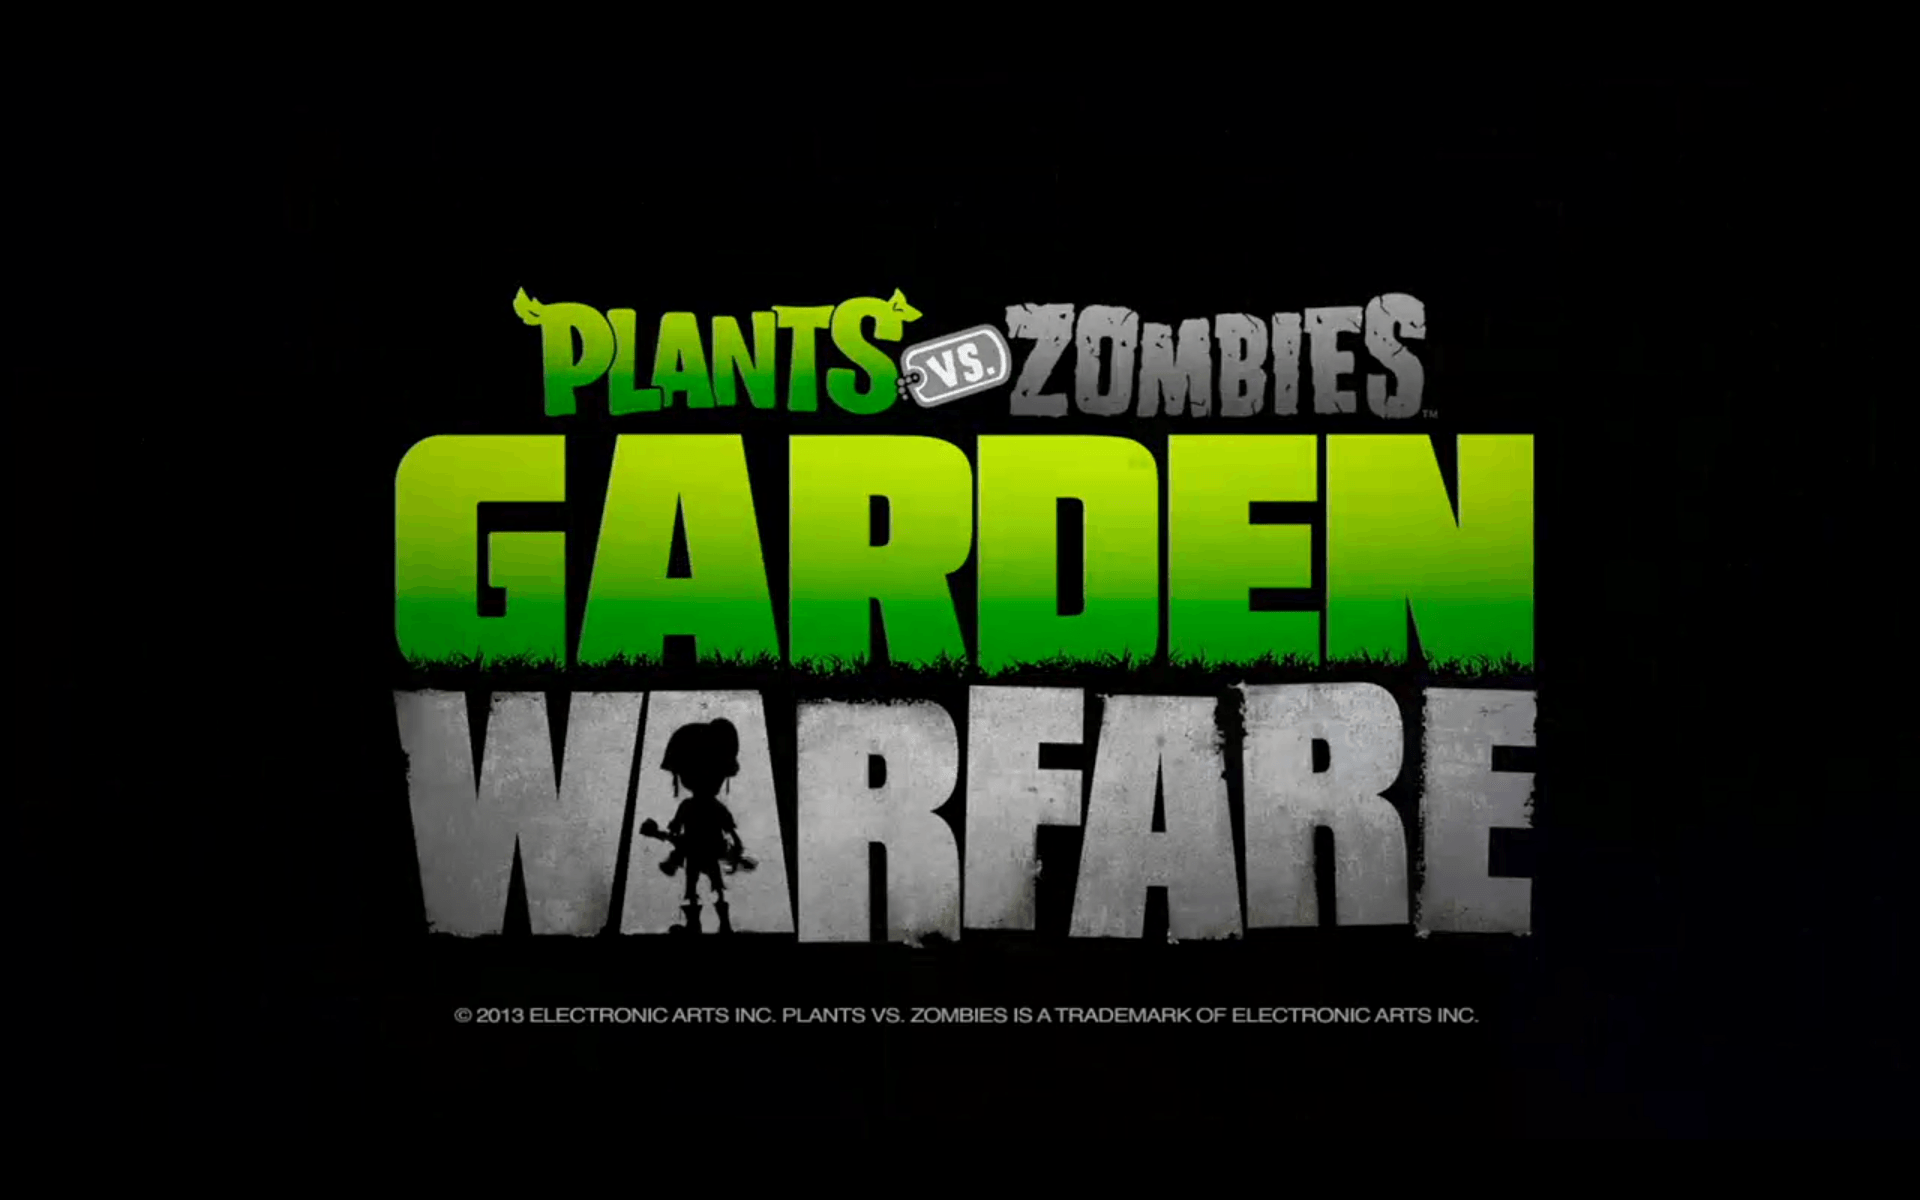 Plants vs Zombies New Garden Warfare « Game Wallpapers HDGame